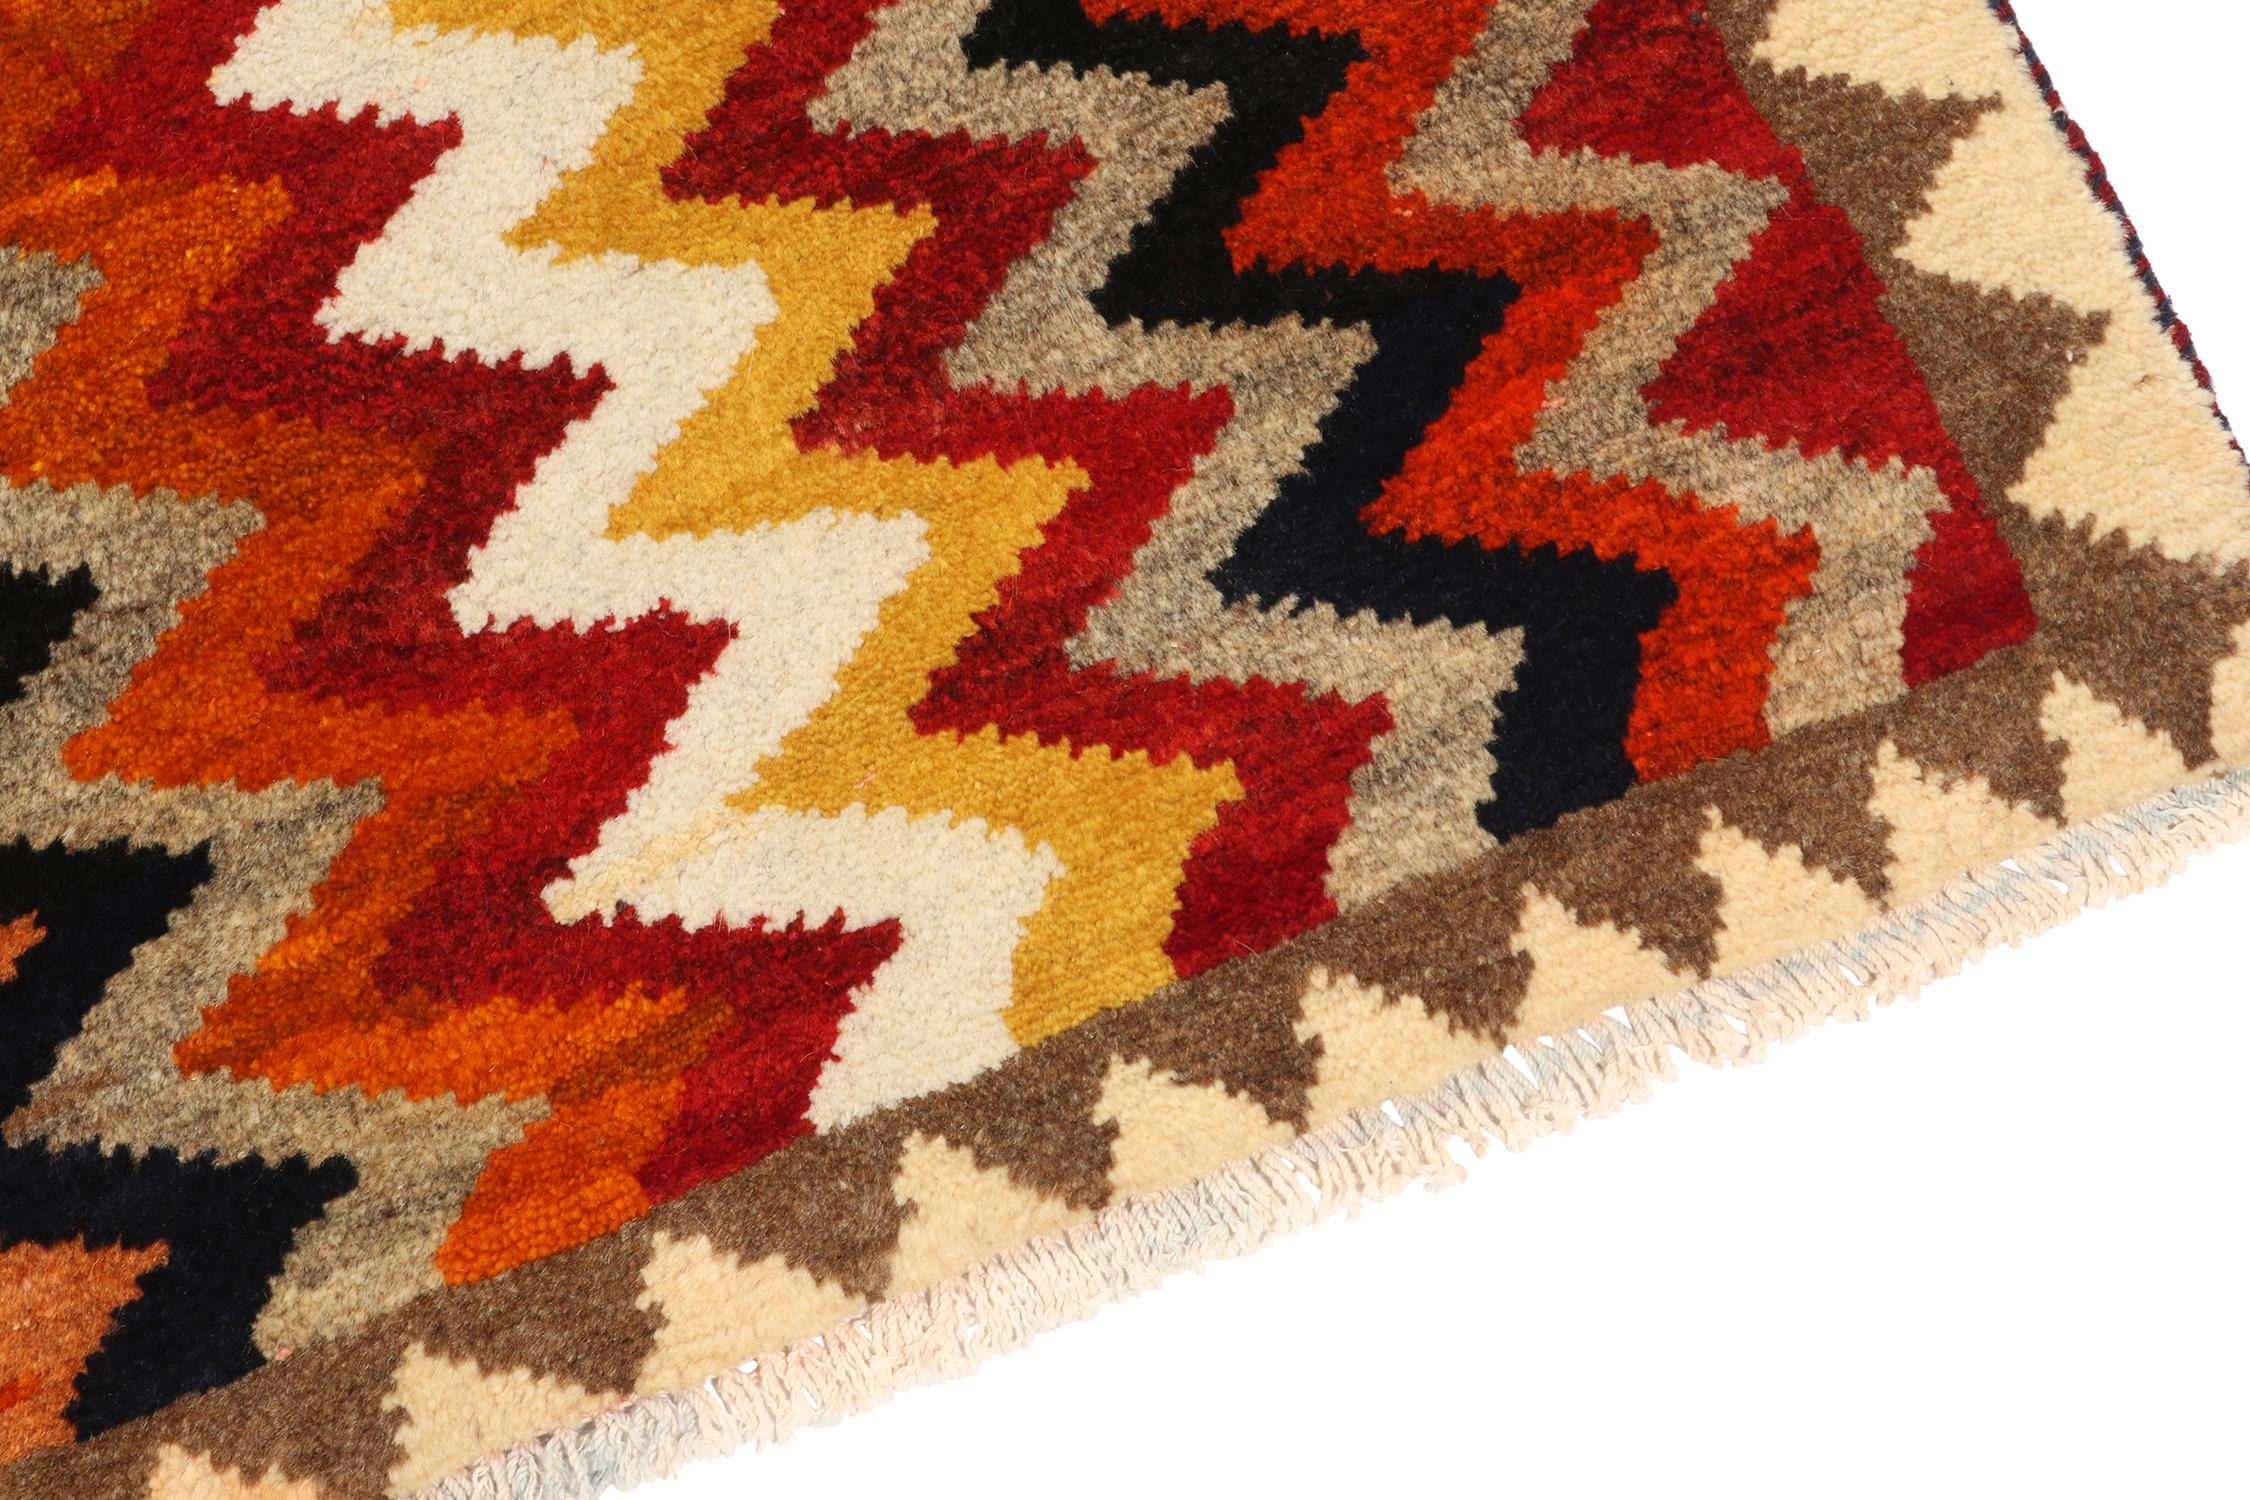 Vintage Gabbeh Persian Tribal Rug in Vibrant Chevron Patterns by Rug & Kilim In Good Condition For Sale In Long Island City, NY